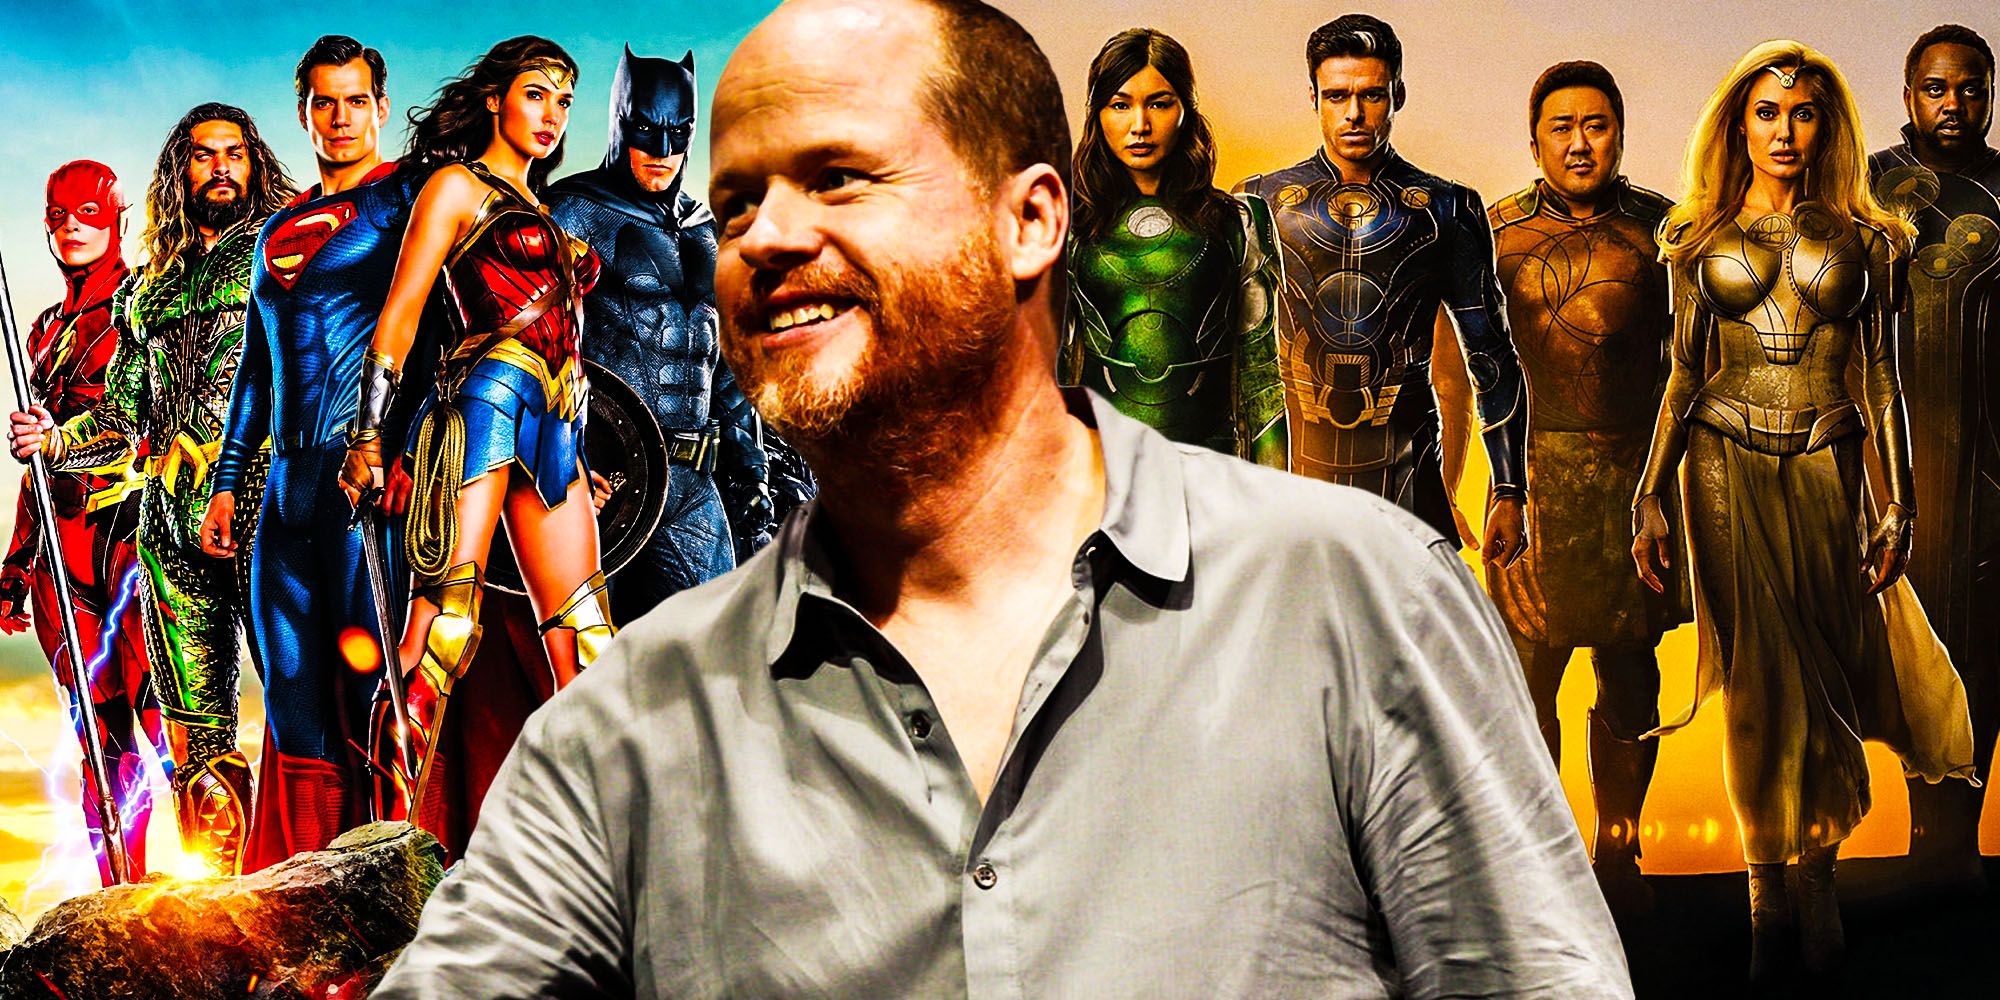 Eternals is the movie WB wanted Joss whedon to turn the justice league into